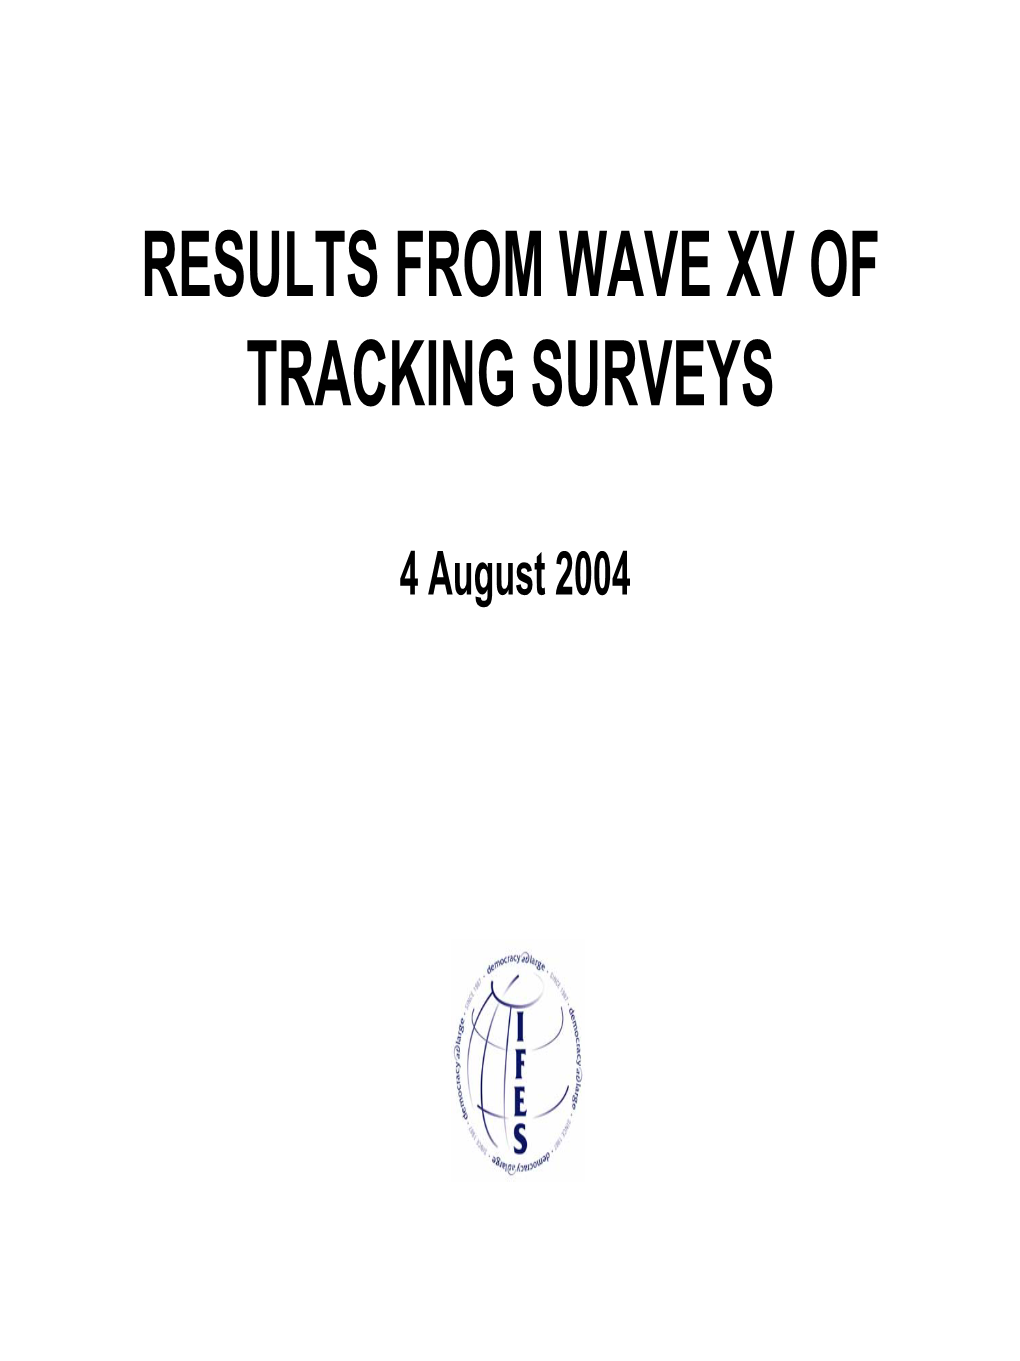 Results from Wave Xv of Tracking Surveys